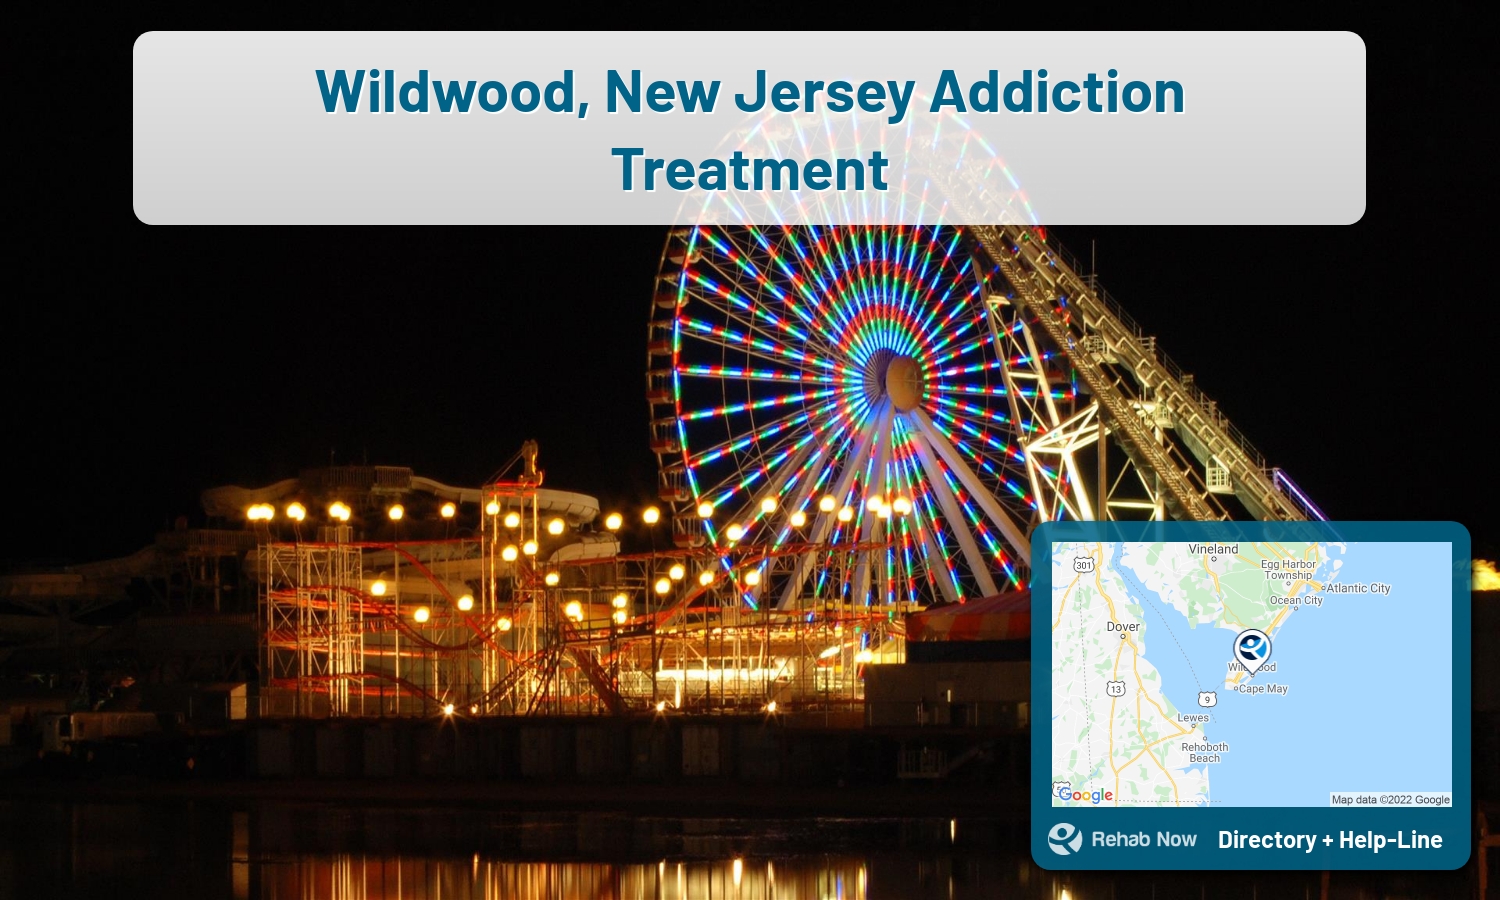 Need treatment nearby in Wildwood, New Jersey? Choose a drug/alcohol rehab center from our list, or call our hotline now for free help.